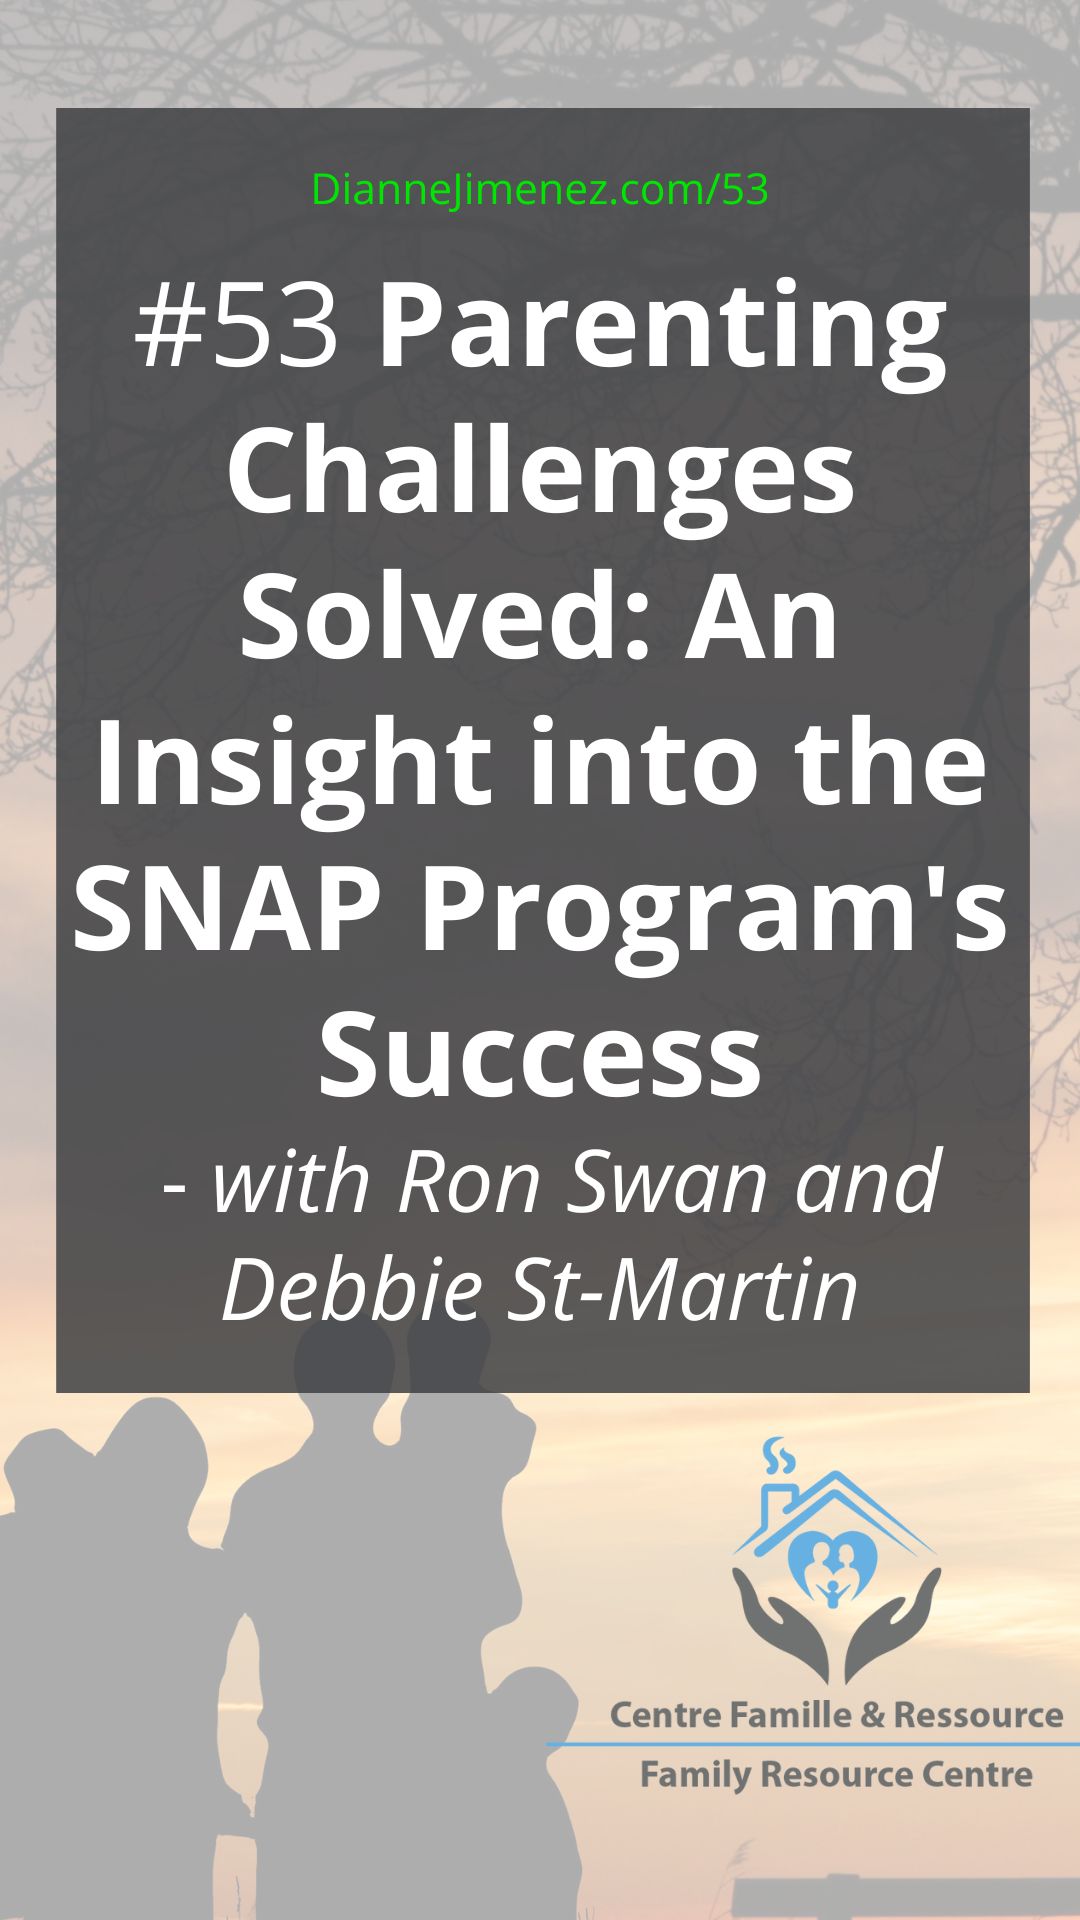 background image is of parents holding their children in front of the sunset. This image is to support the episode title: Parenting Challenges Solved: An Insight Into the SNAP Program's Success